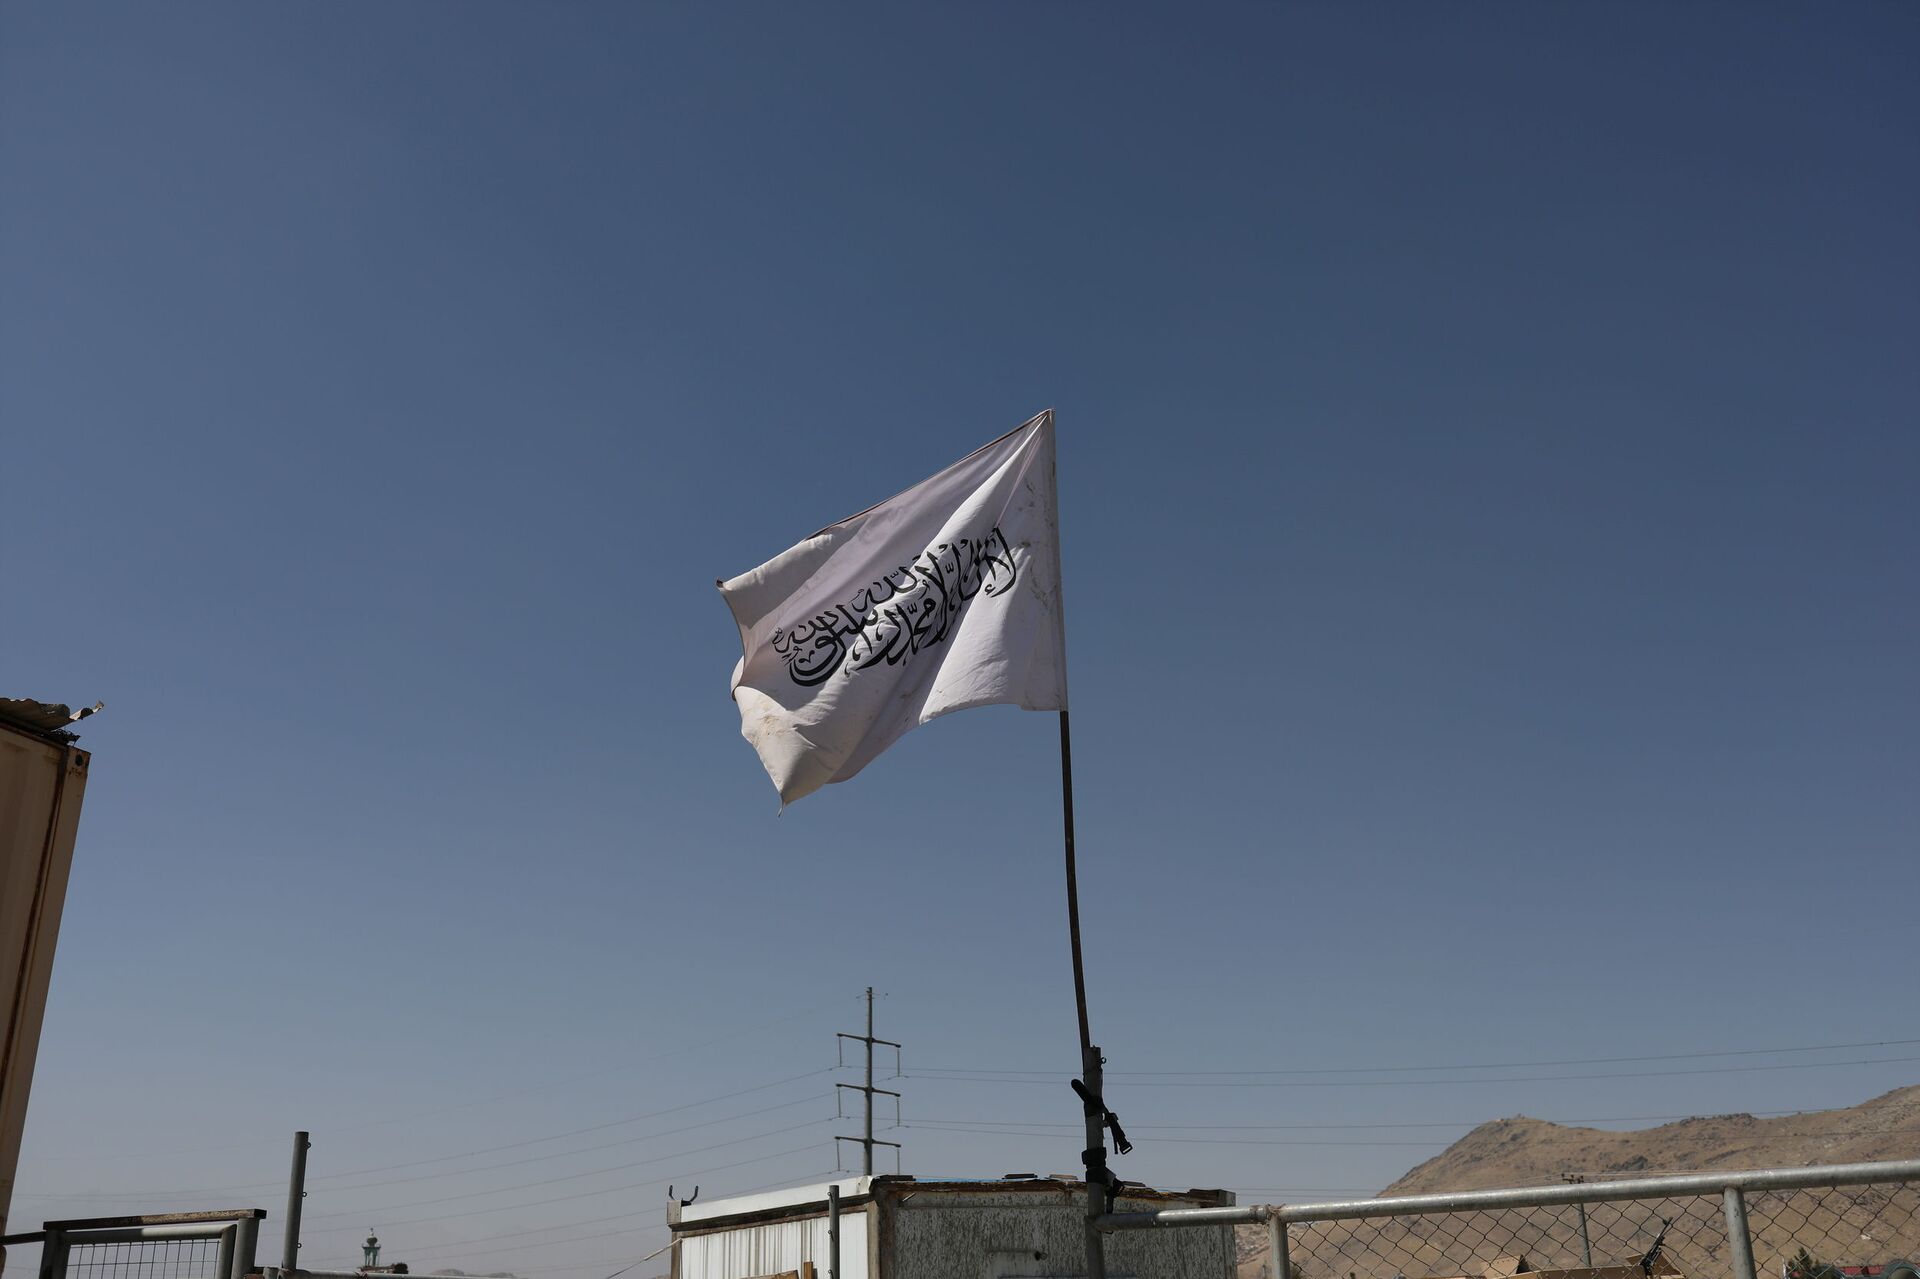 The flag of the Islamic Emirate of Afghanistan (Taliban) is raised at the military airfield in Kabul, Afghanistan, September 5, 2021. - Sputnik International, 1920, 14.09.2021